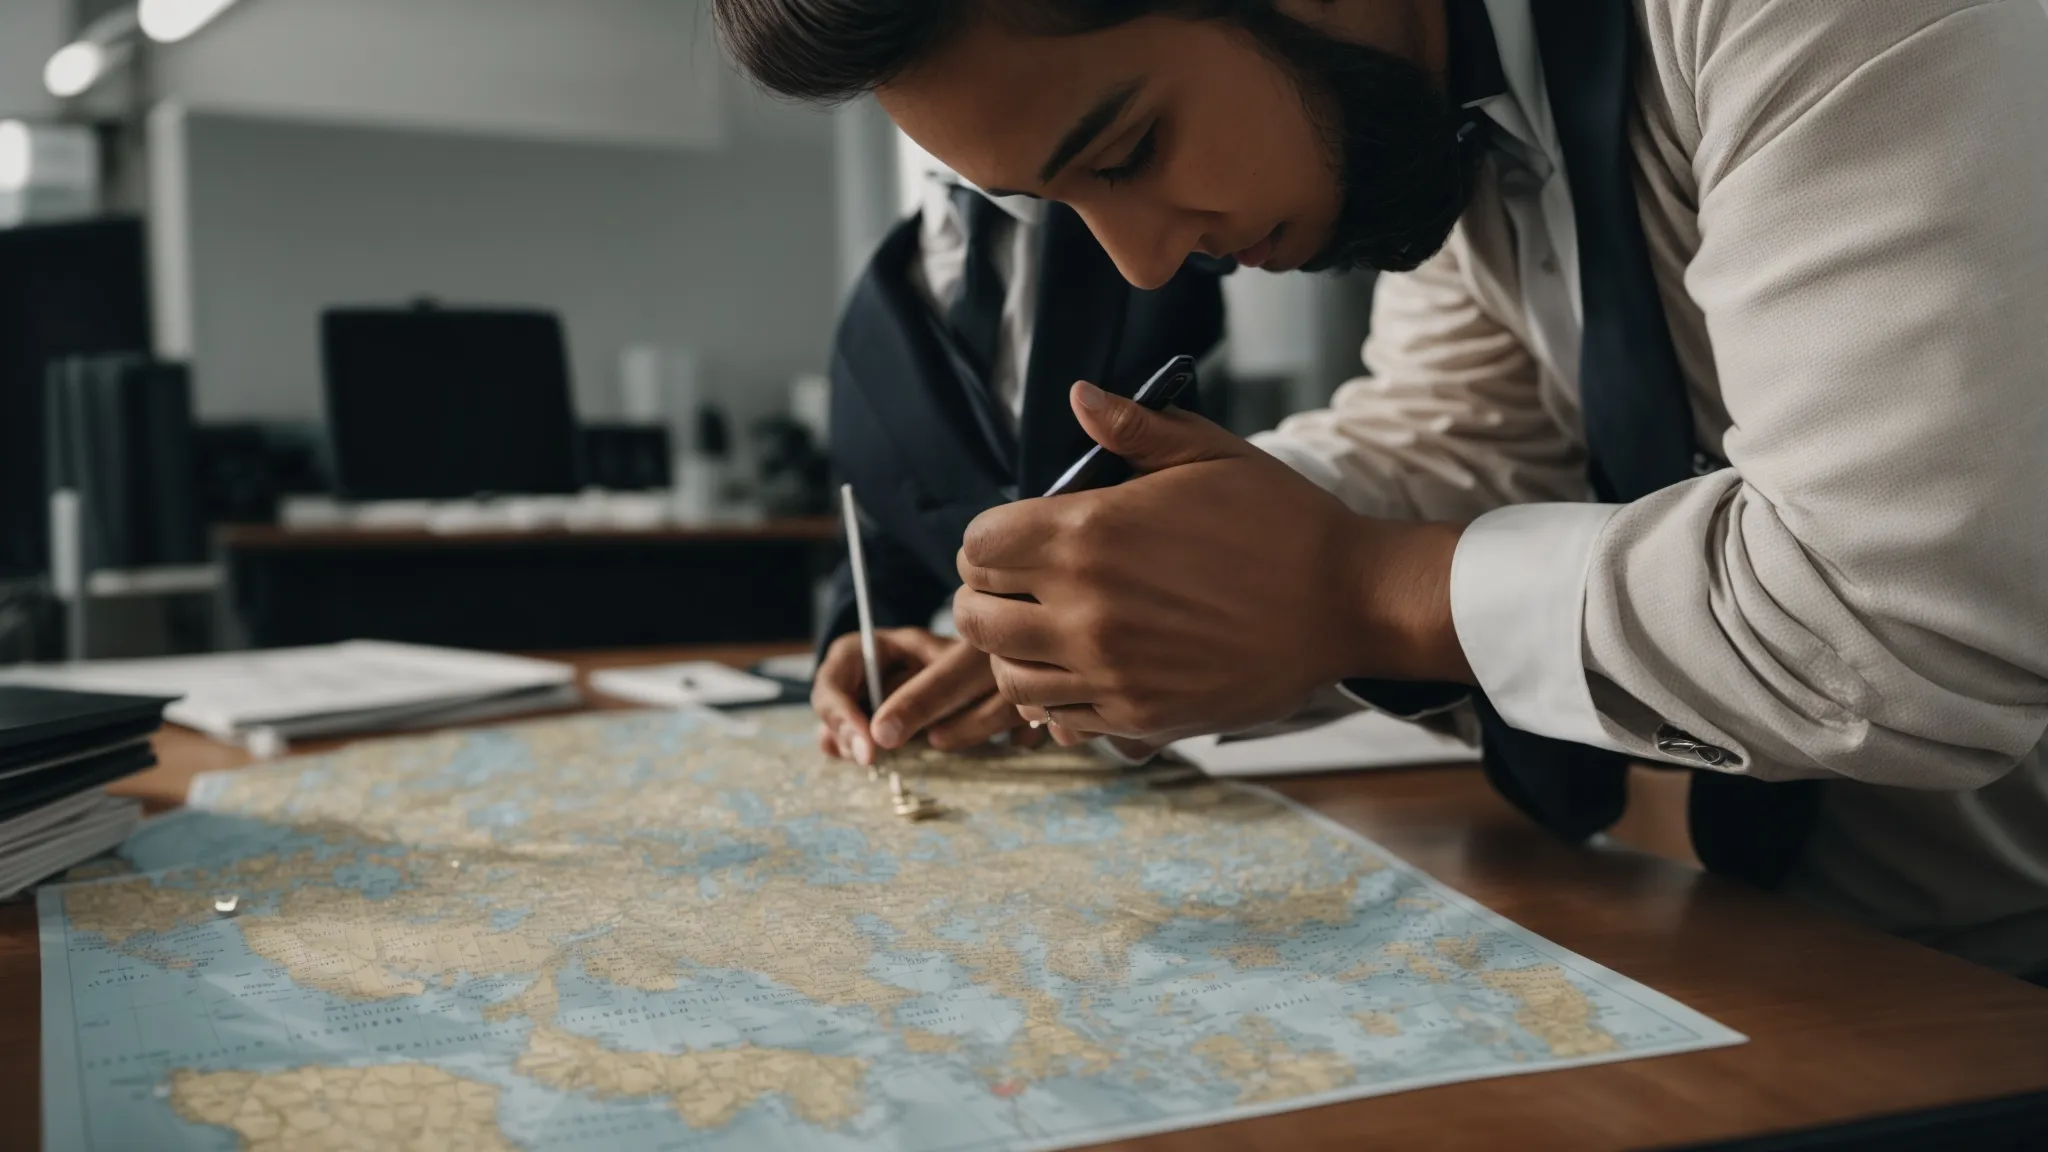 a professional in a suit studies a world map dotted with pins and connecting lines while clutching a phone in a well-lit office.